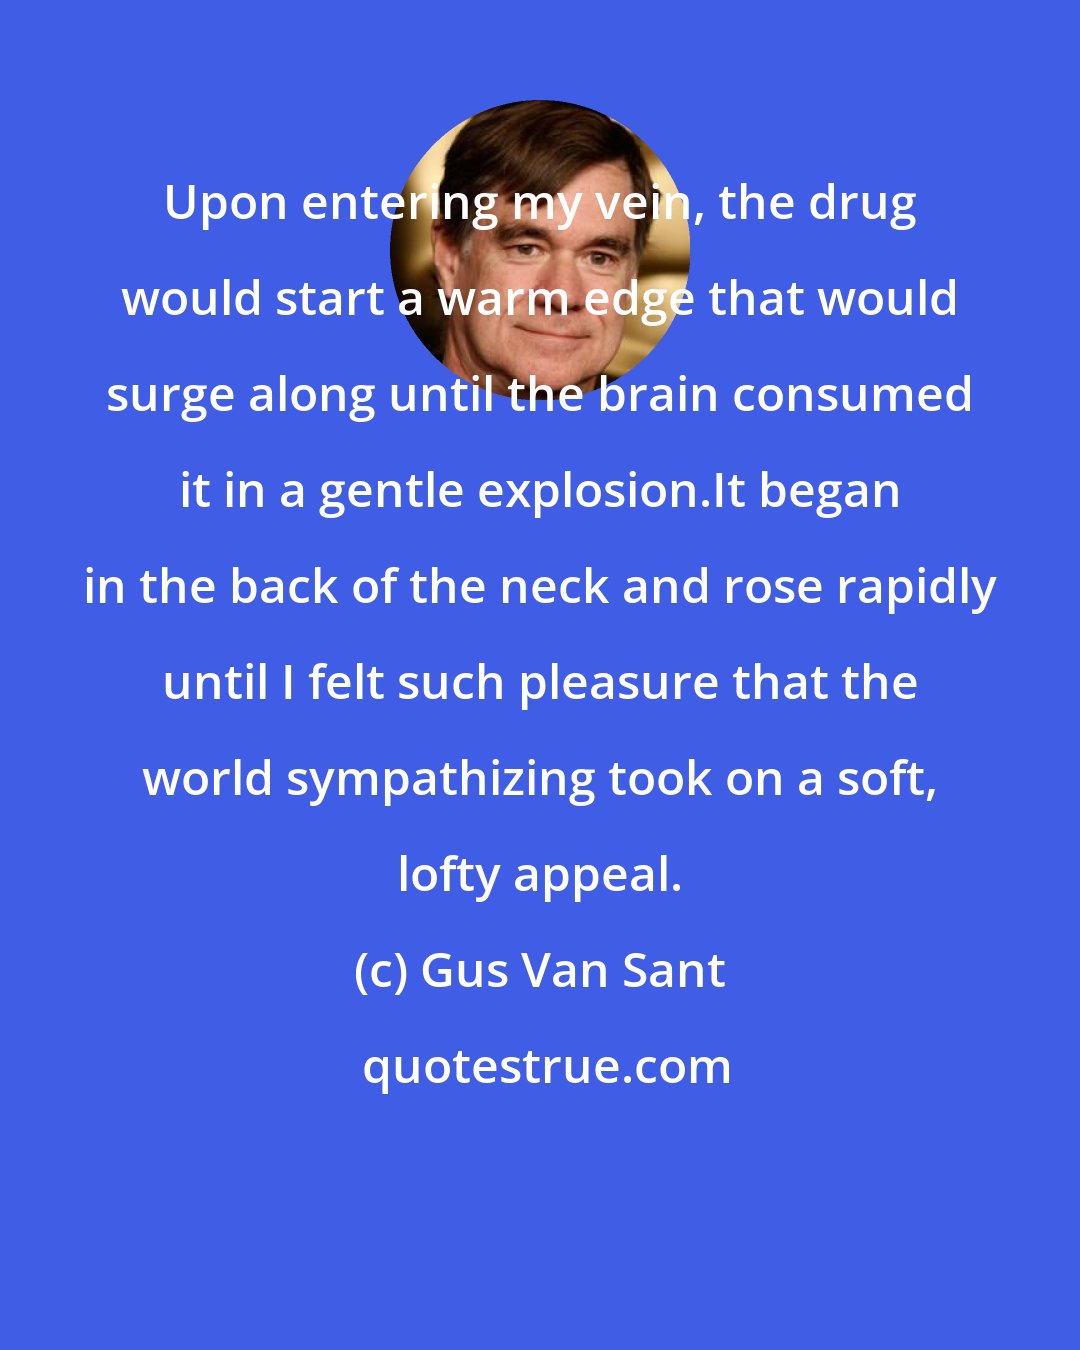 Gus Van Sant: Upon entering my vein, the drug would start a warm edge that would surge along until the brain consumed it in a gentle explosion.It began in the back of the neck and rose rapidly until I felt such pleasure that the world sympathizing took on a soft, lofty appeal.